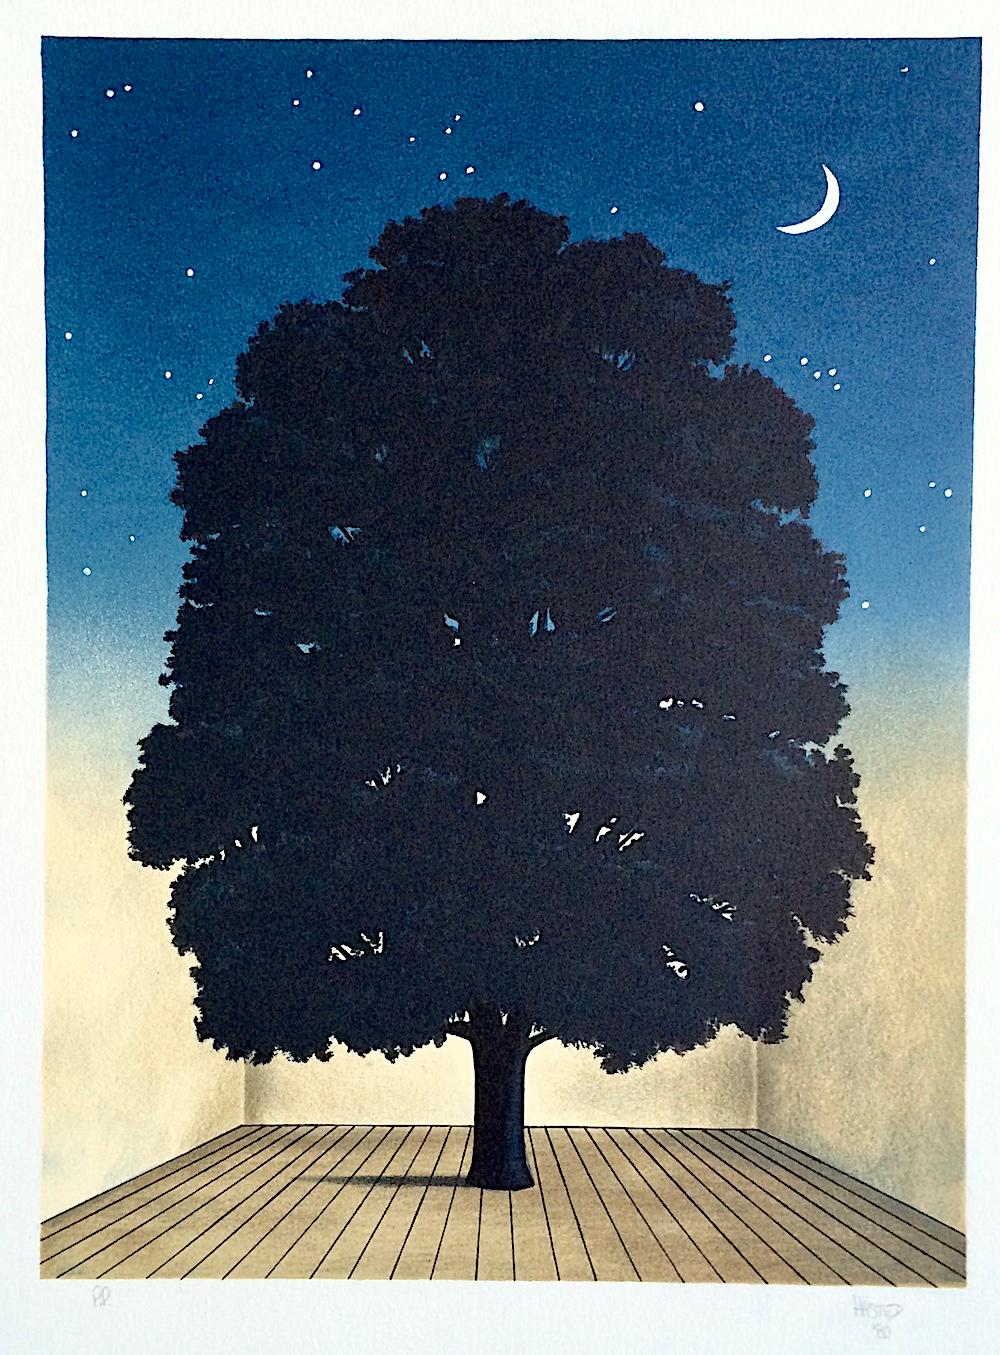 Michael Hasted Interior Print - SONG OF PRAISE Hand Drawn Lithograph, Surrealist Dark Tree, Crescent Moon